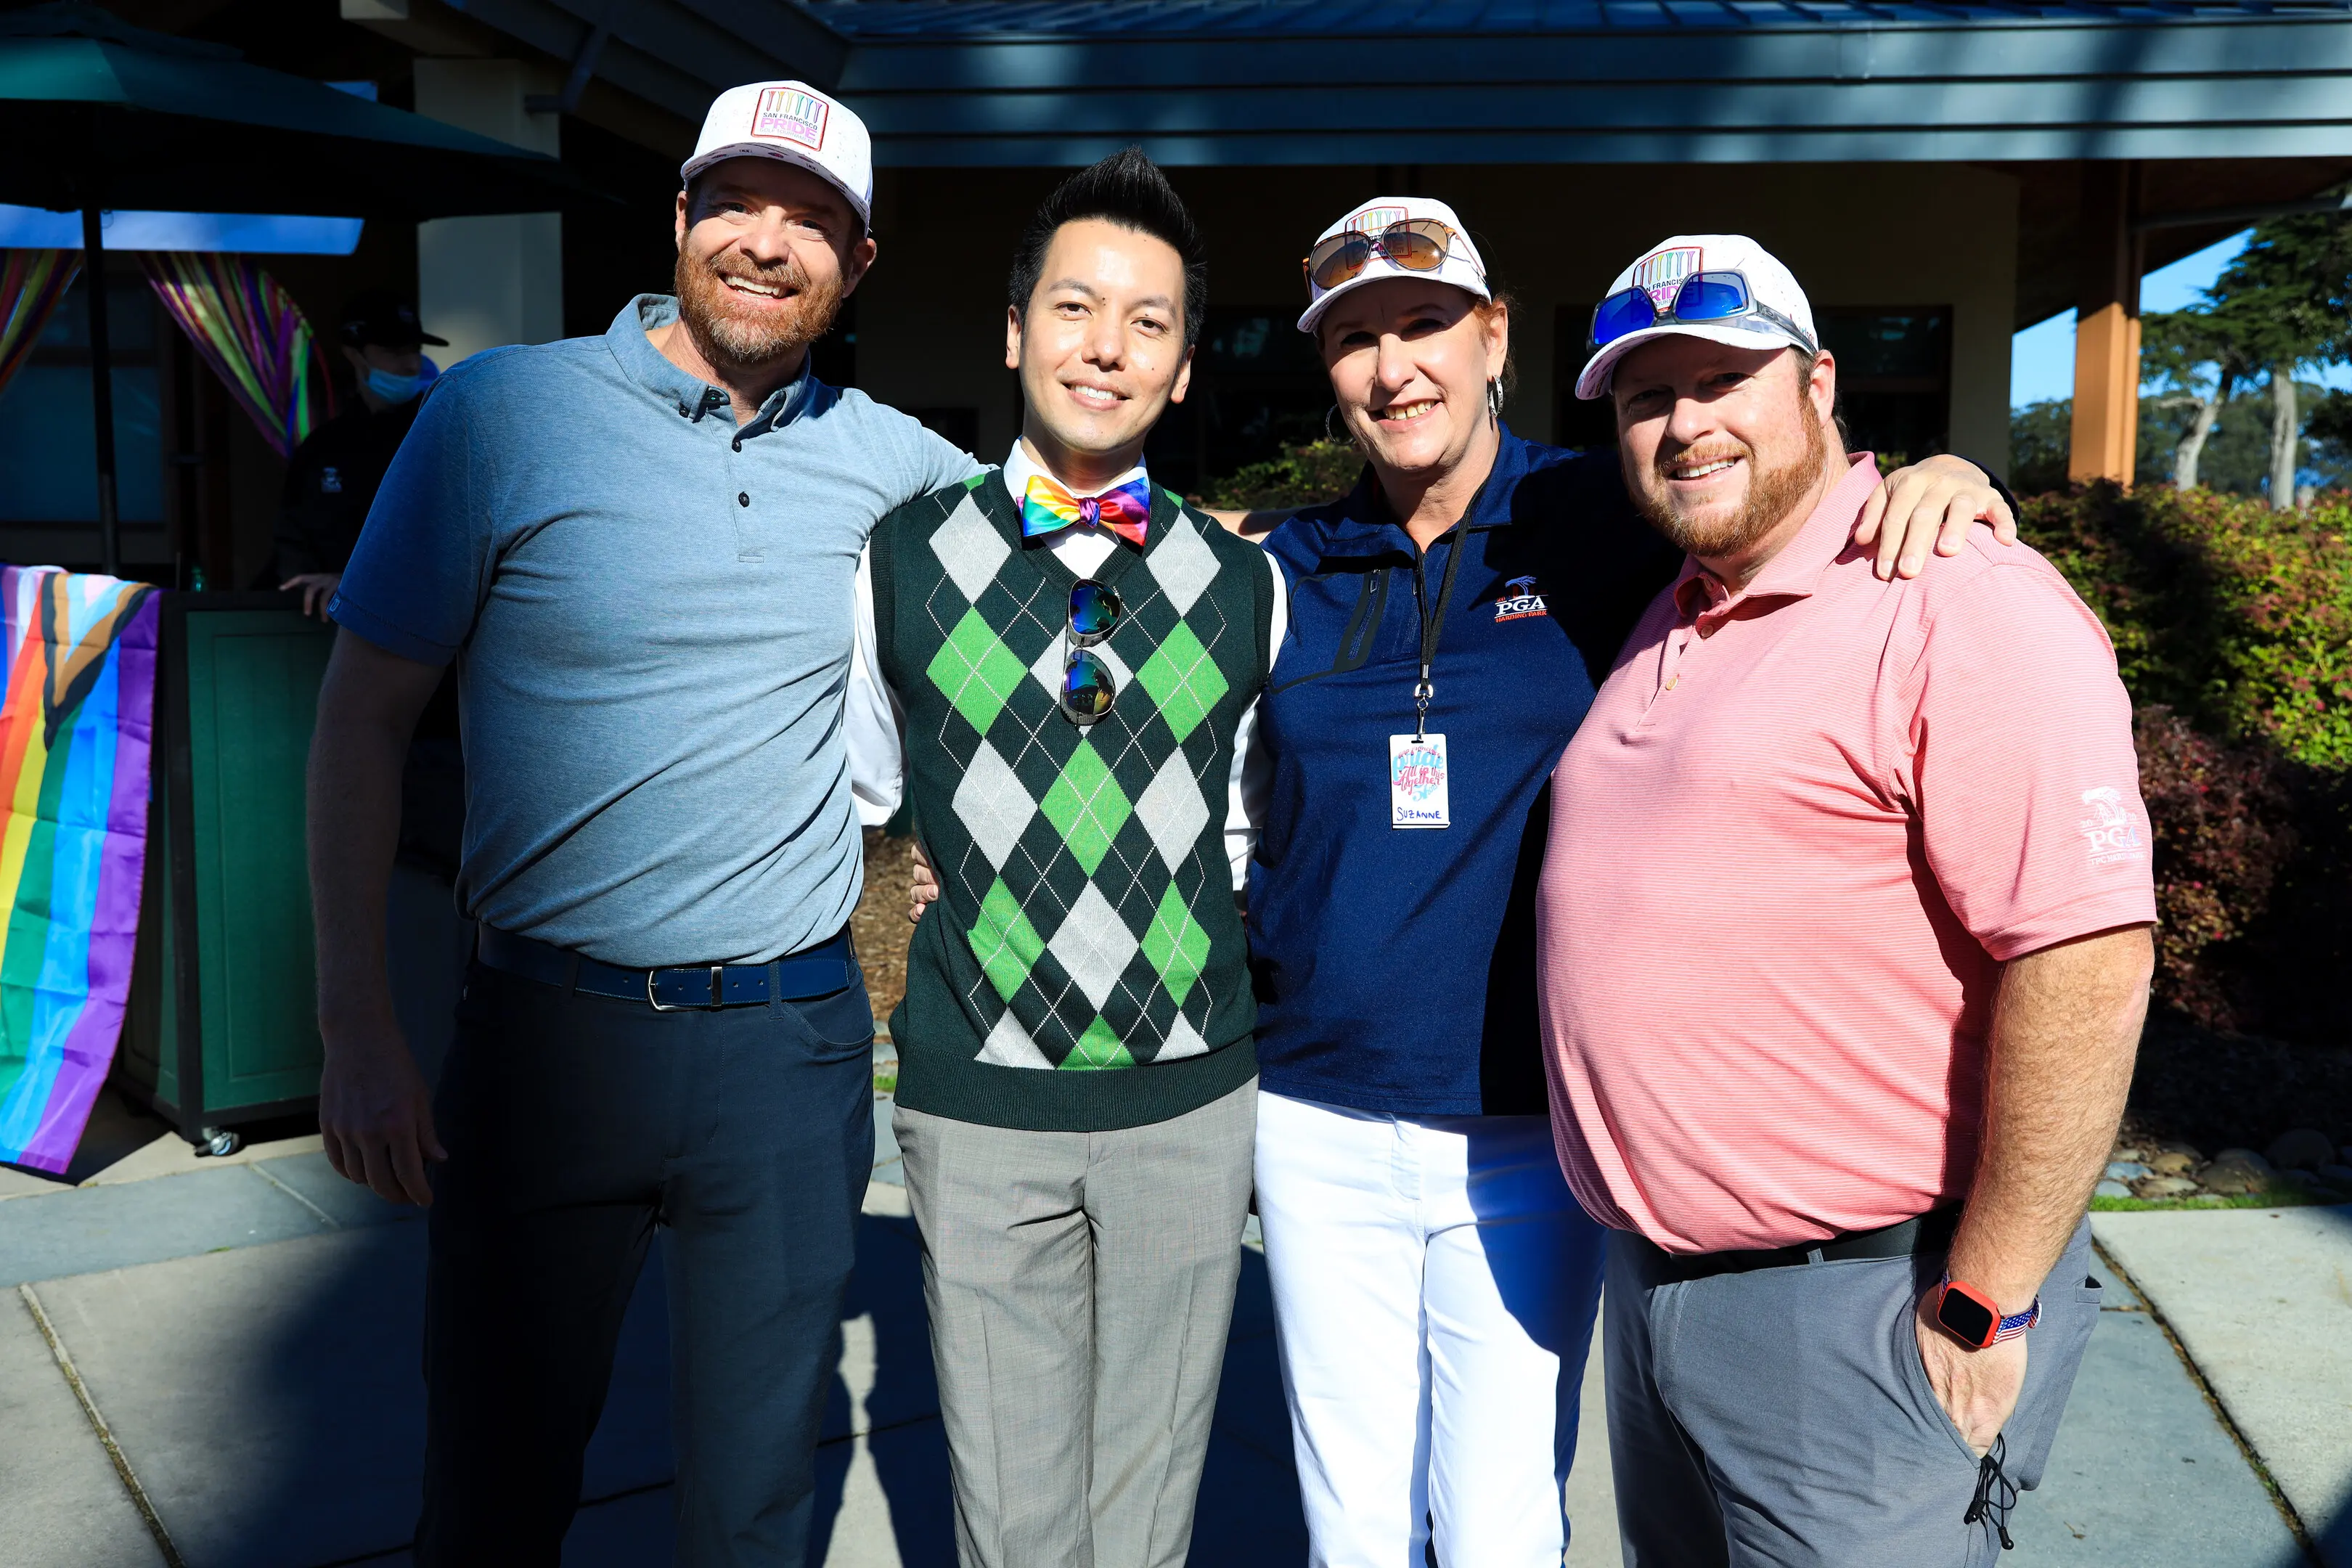 PGA Golf Pro Greg Fitzgerald, Nguyen Pham, Suzanne Ford, and Tom Smith